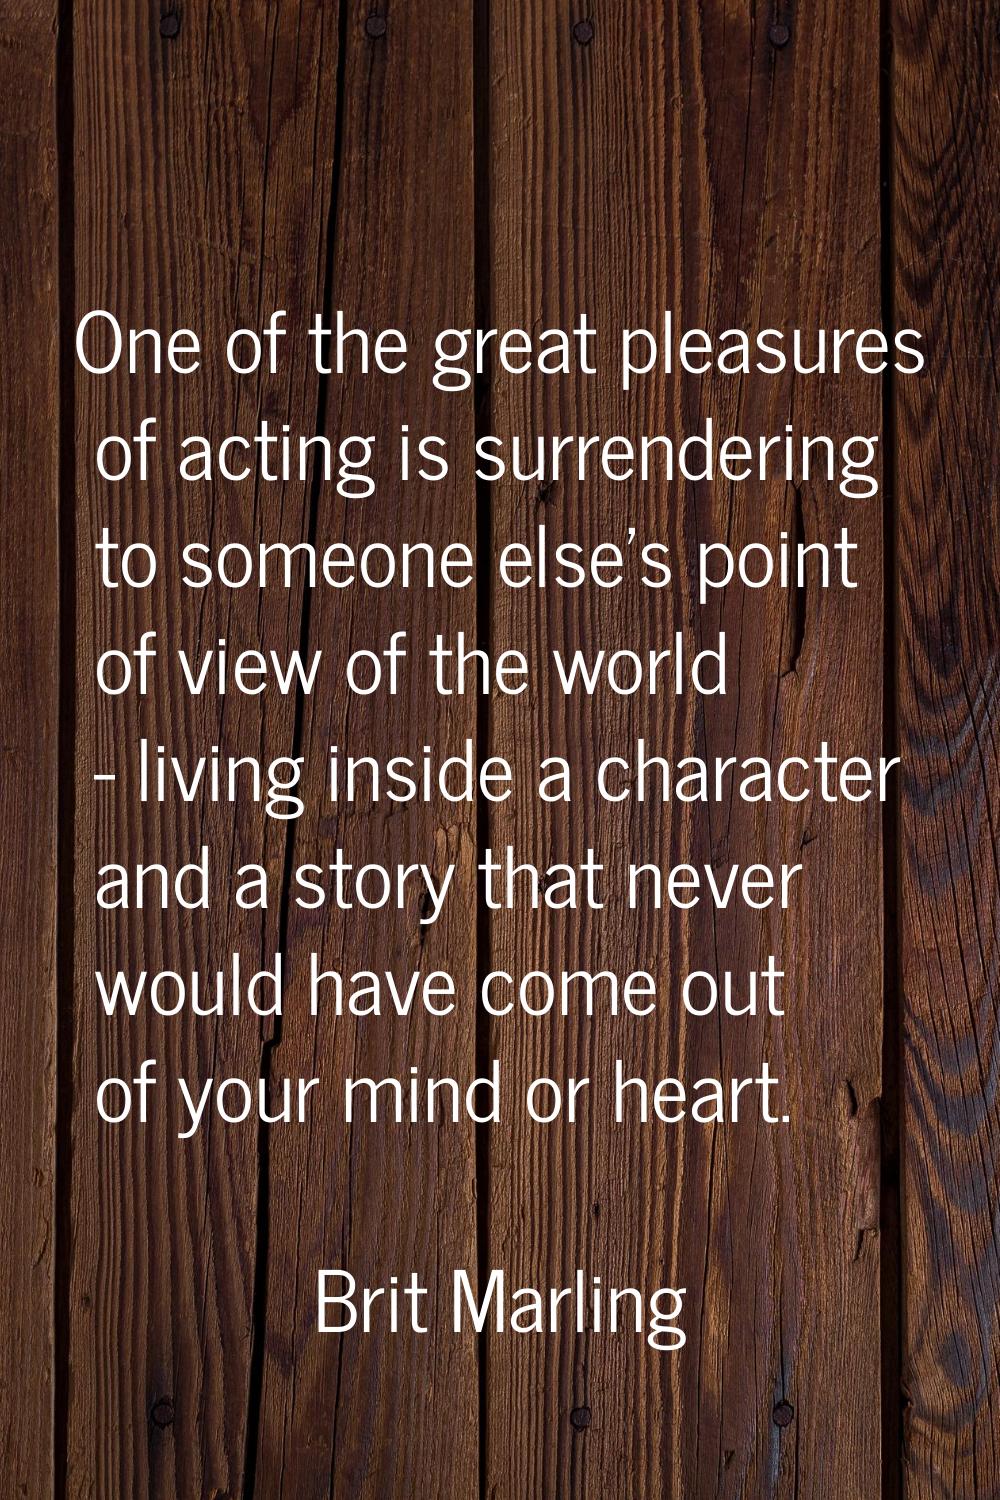 One of the great pleasures of acting is surrendering to someone else's point of view of the world -